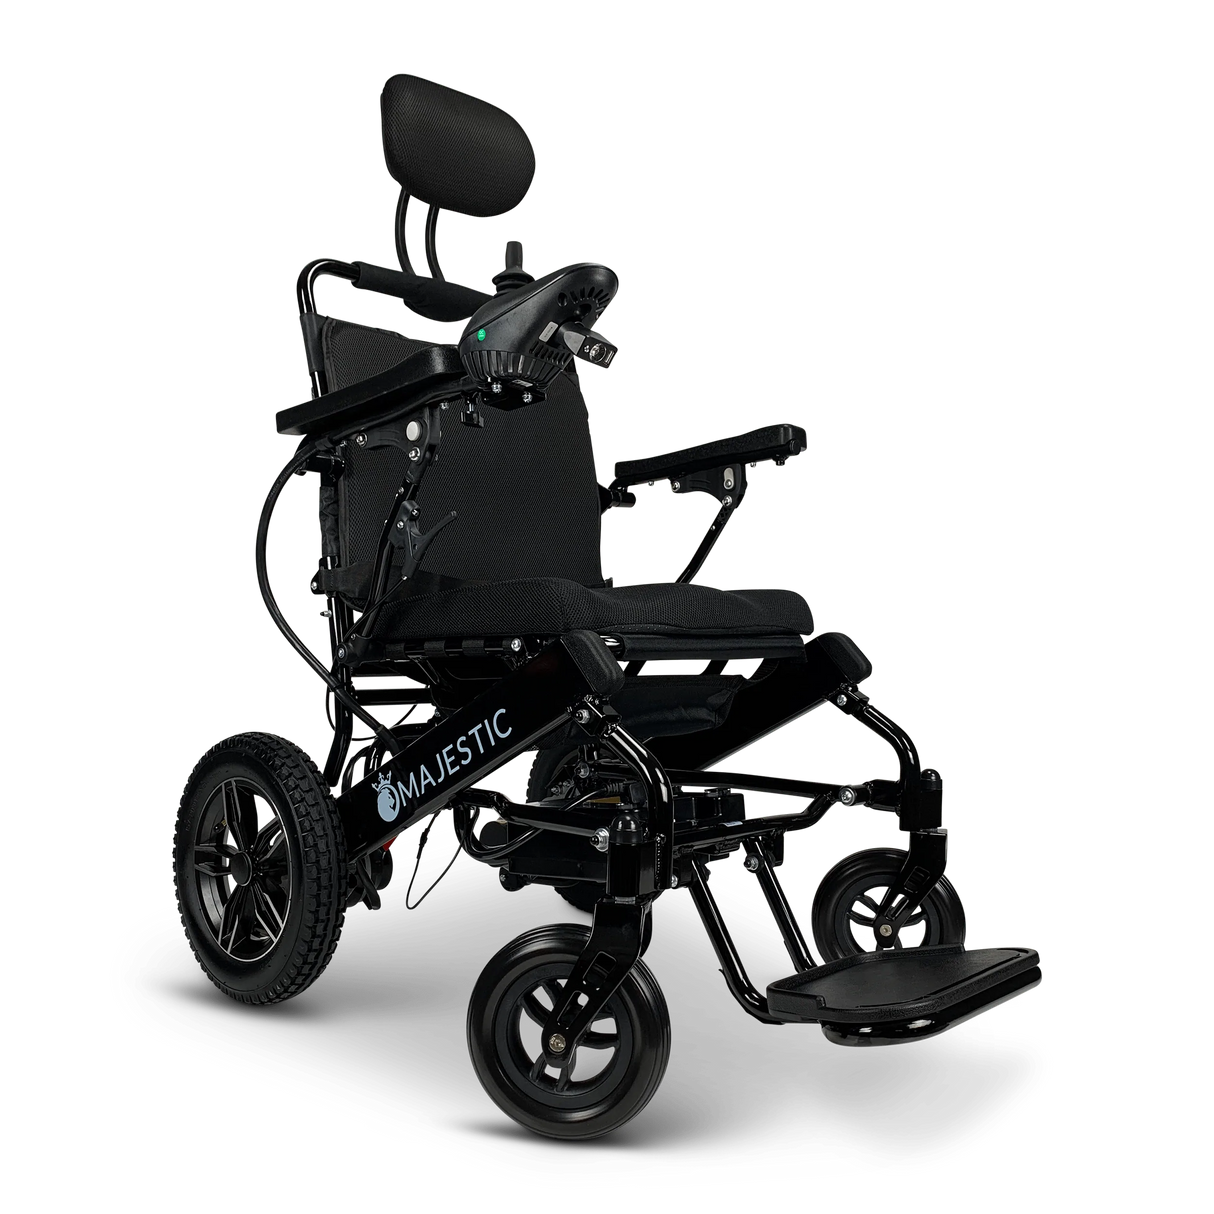 ComfyGo Majestic IQ-8000 Remote Controlled Folding Lightweight Electric Wheelchair